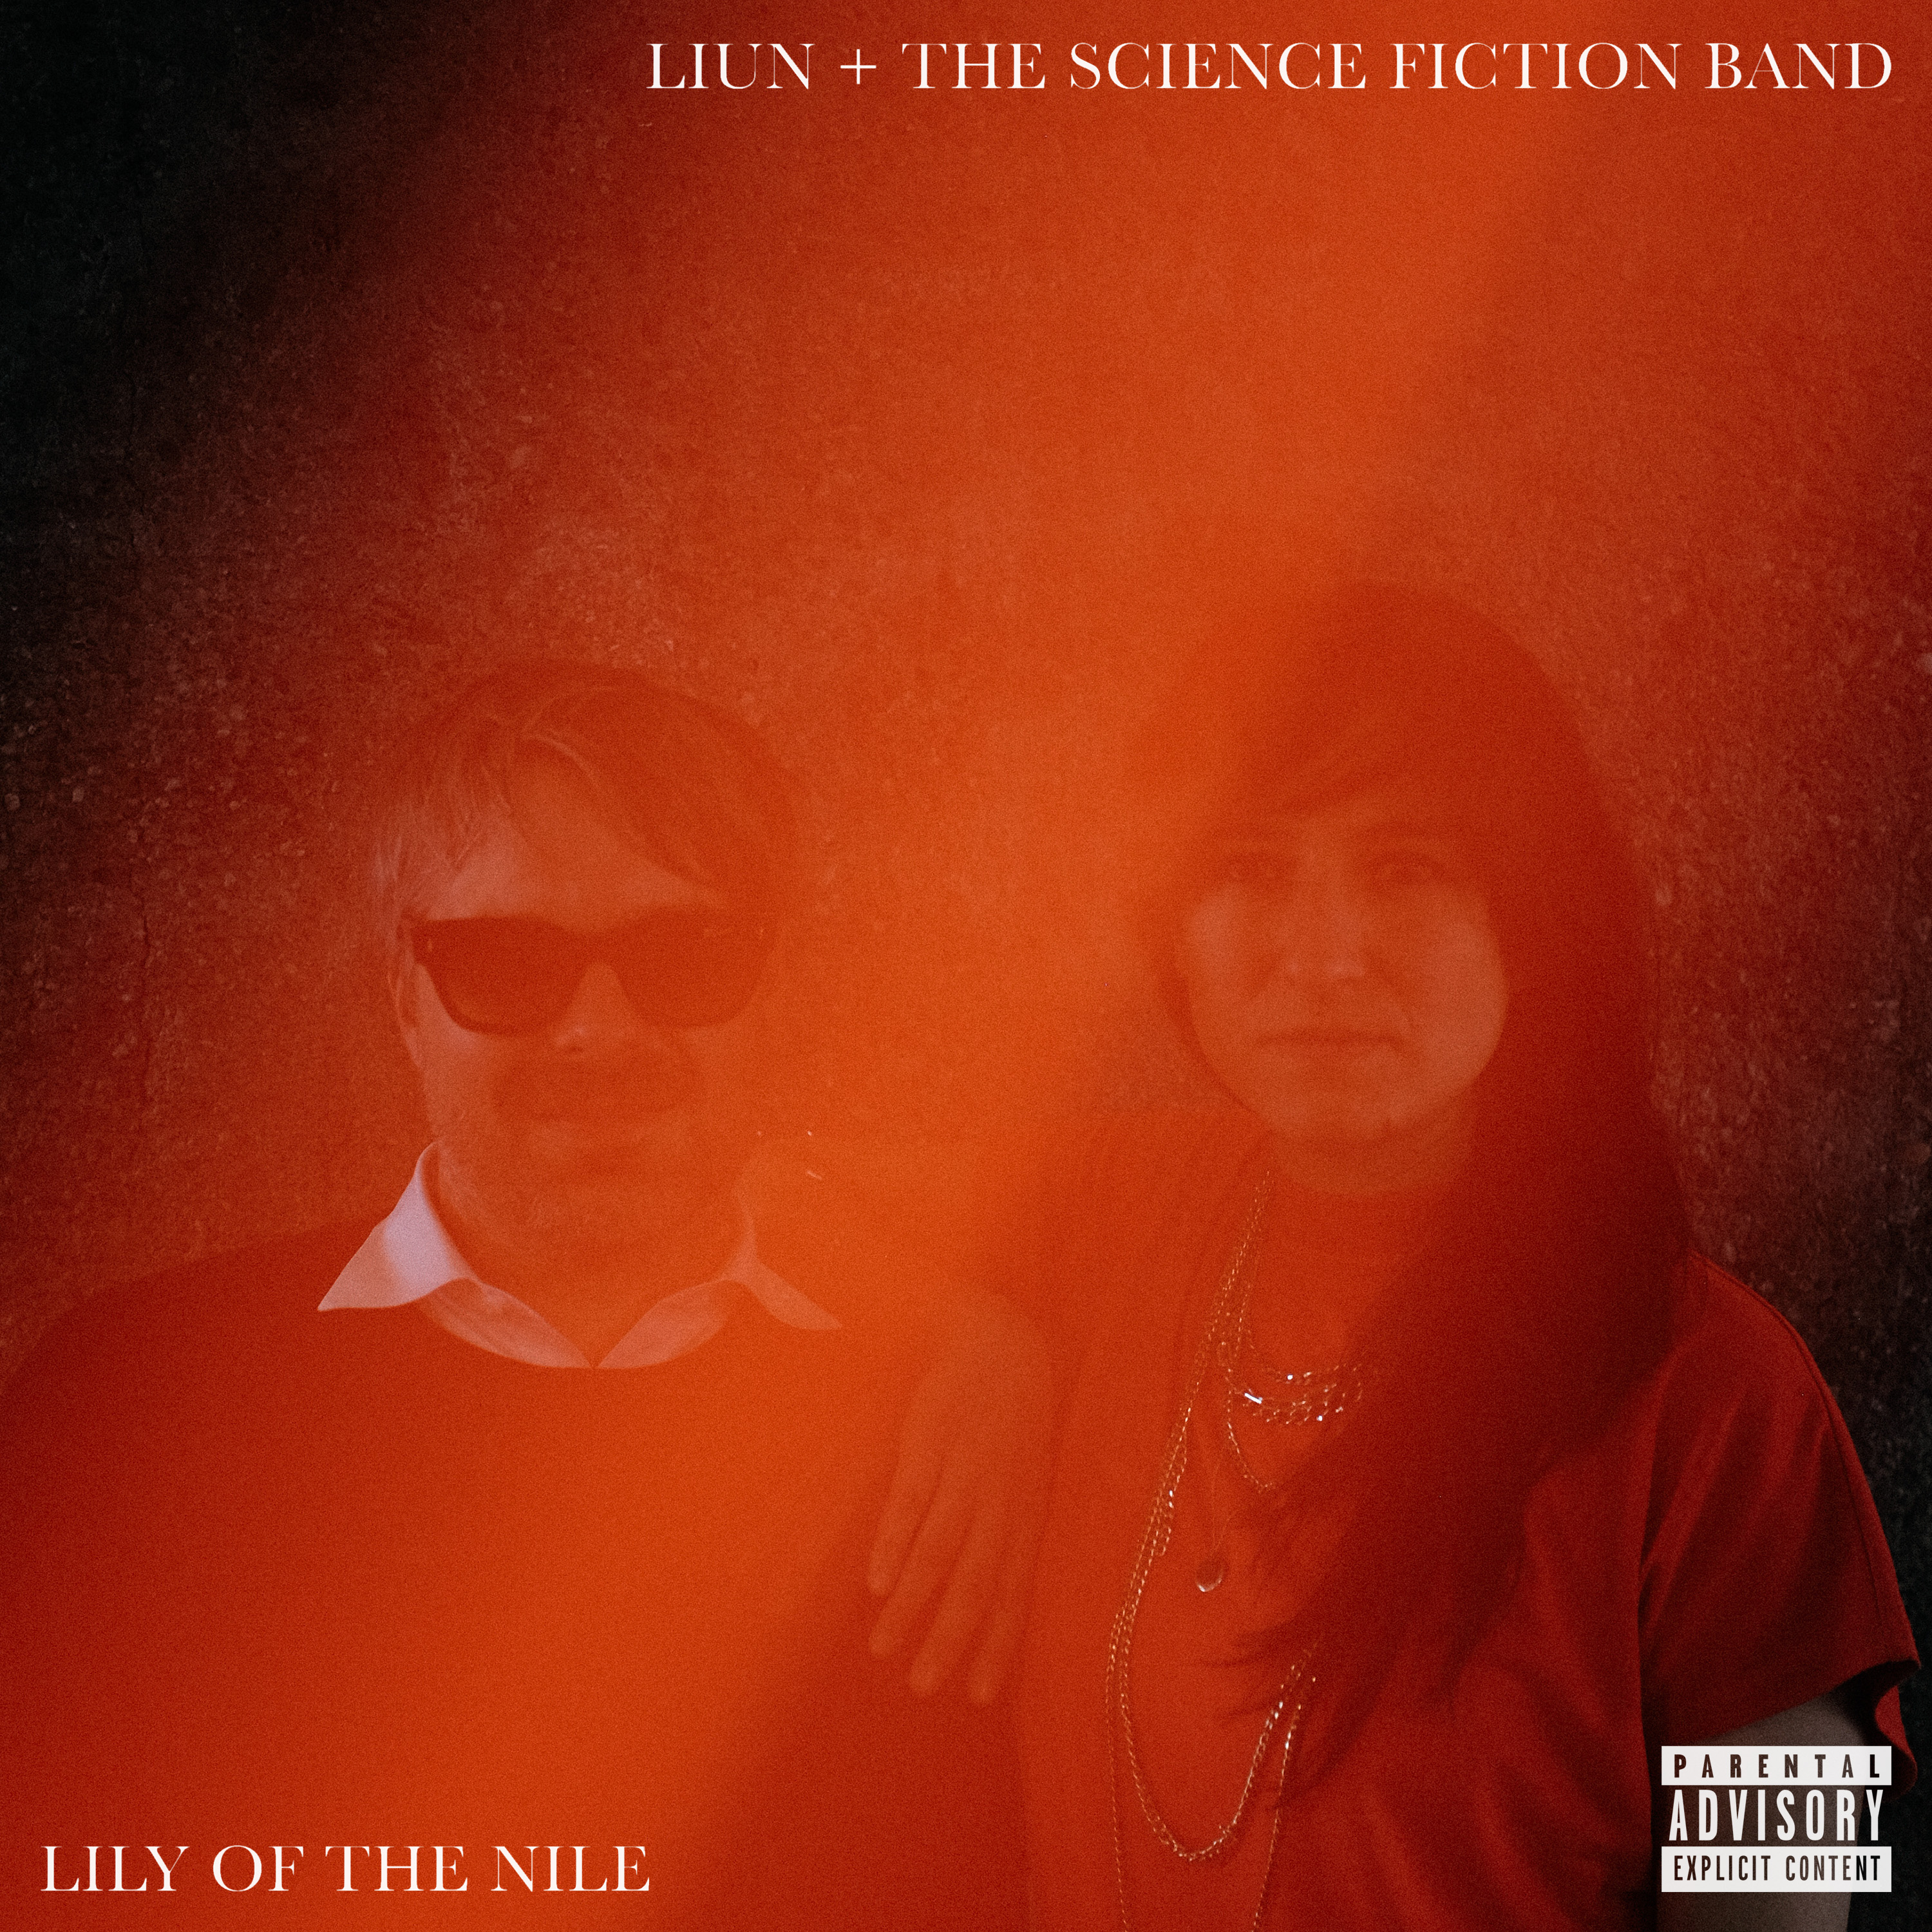 Lucia Cadotsch & Wanja Slavin LIUN + The Science Fiction Band
Lily Of The Nile oder jazz-fun